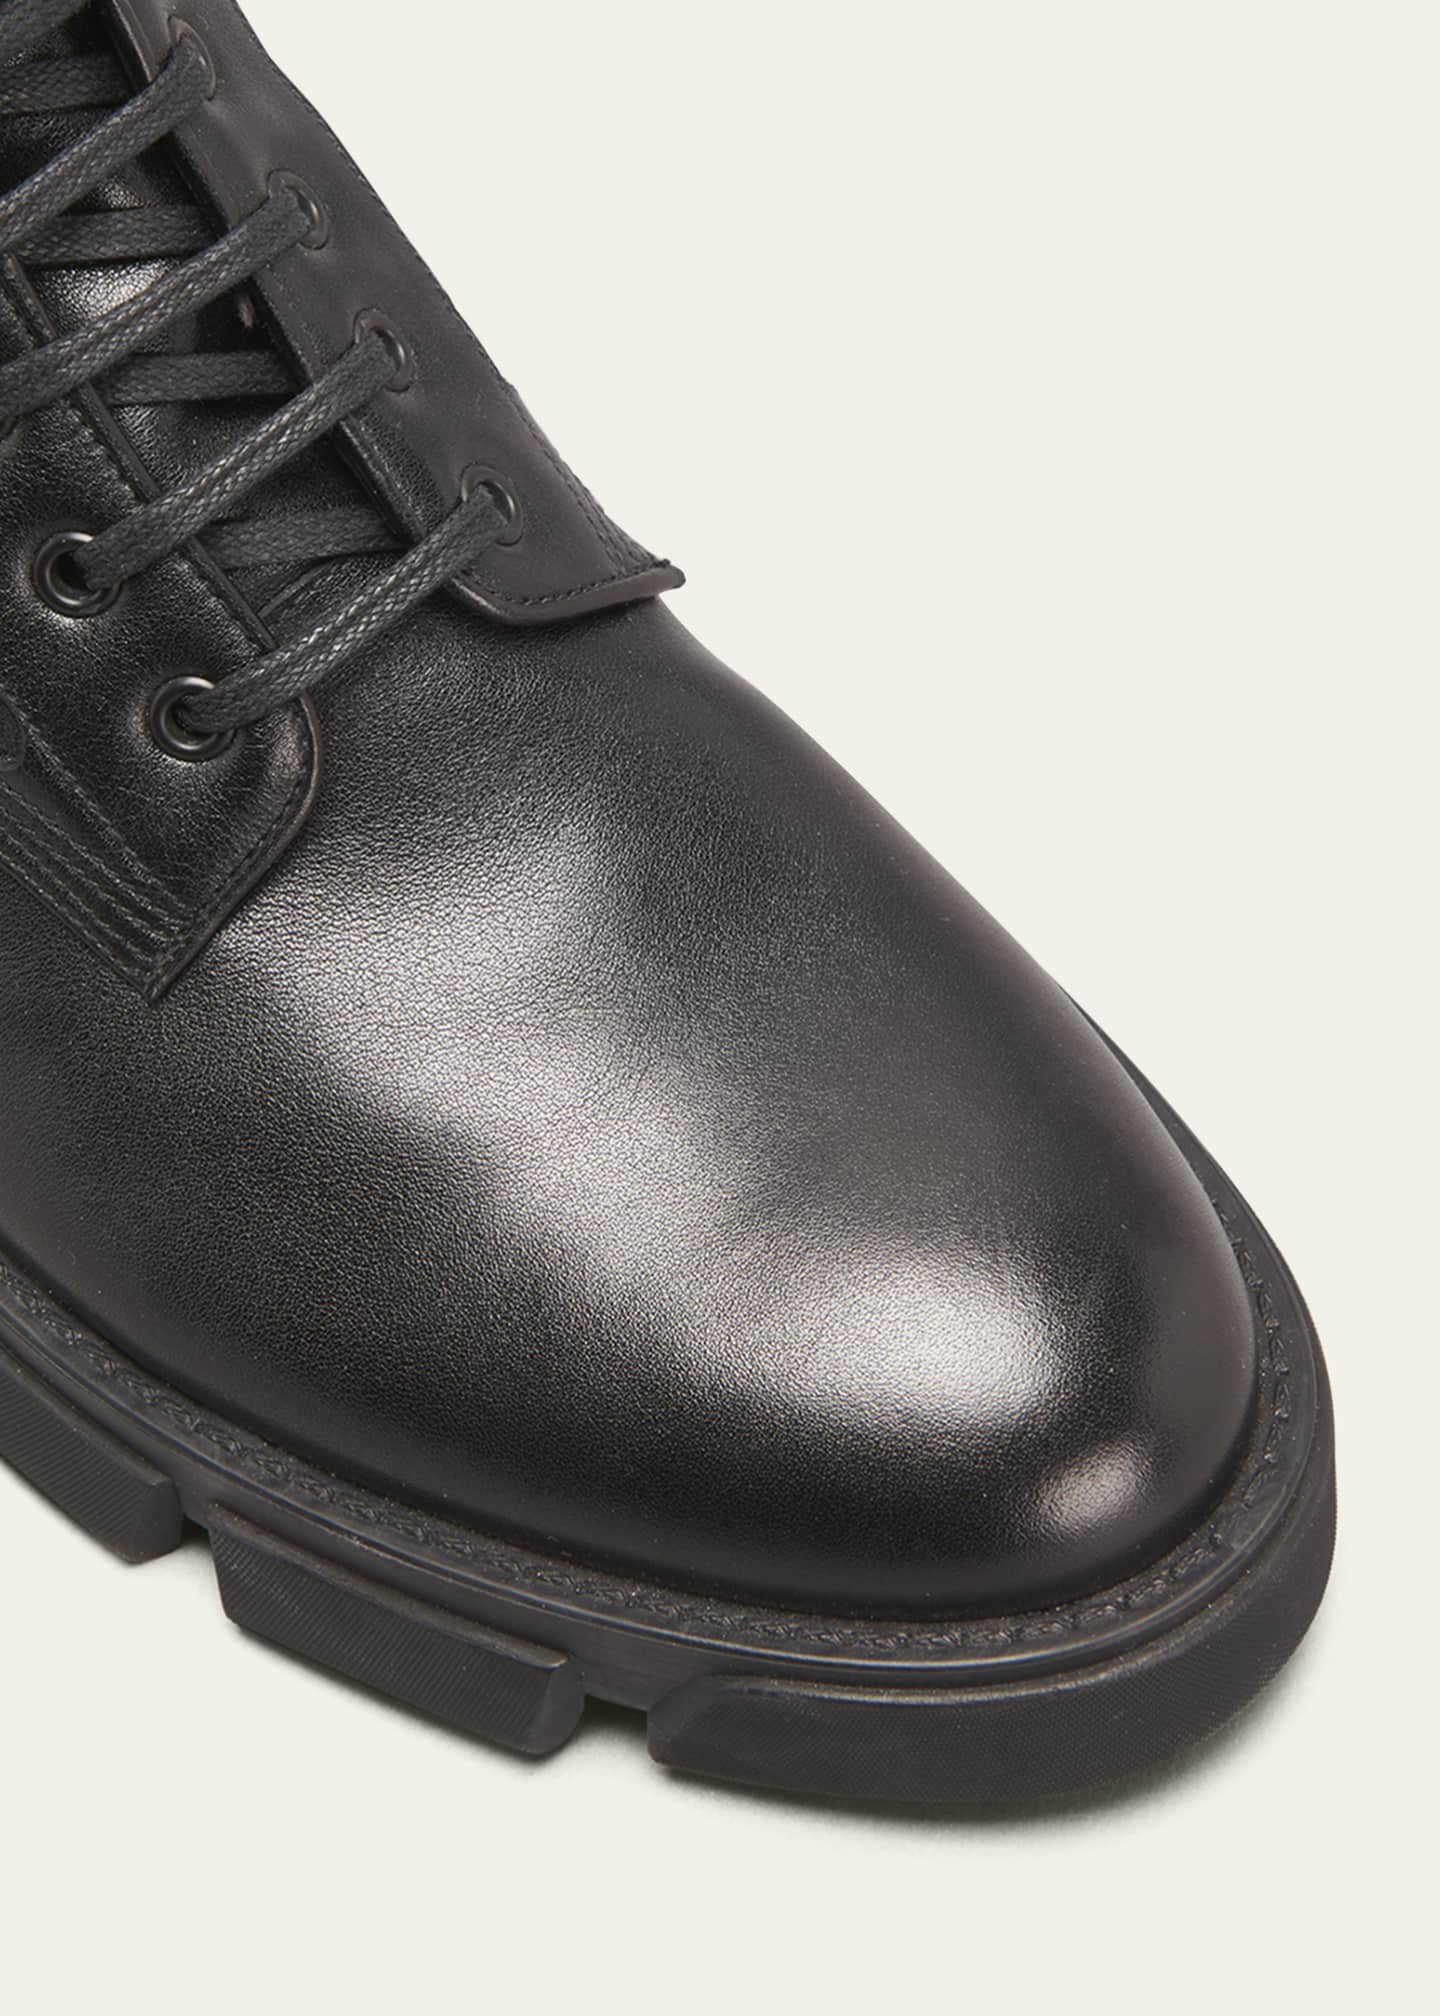 Givenchy Men's Terra Leather Lace-Up Combat Boots